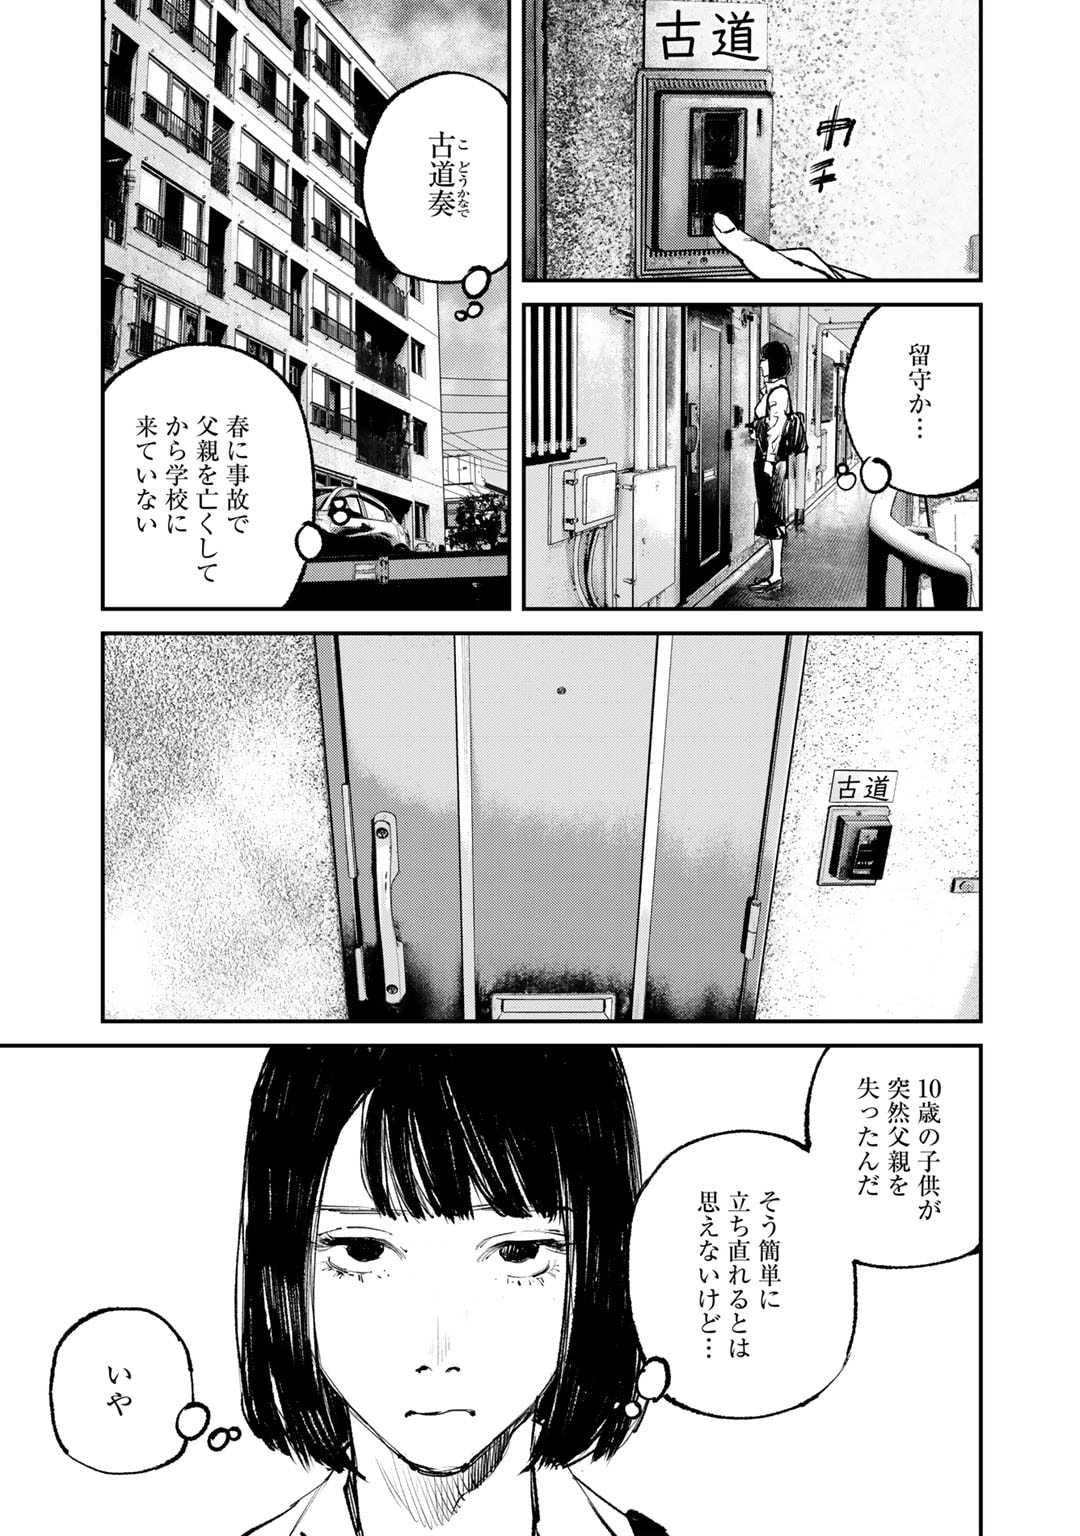 Kanata Is Into More Darker - Chapter 1 - Page 23